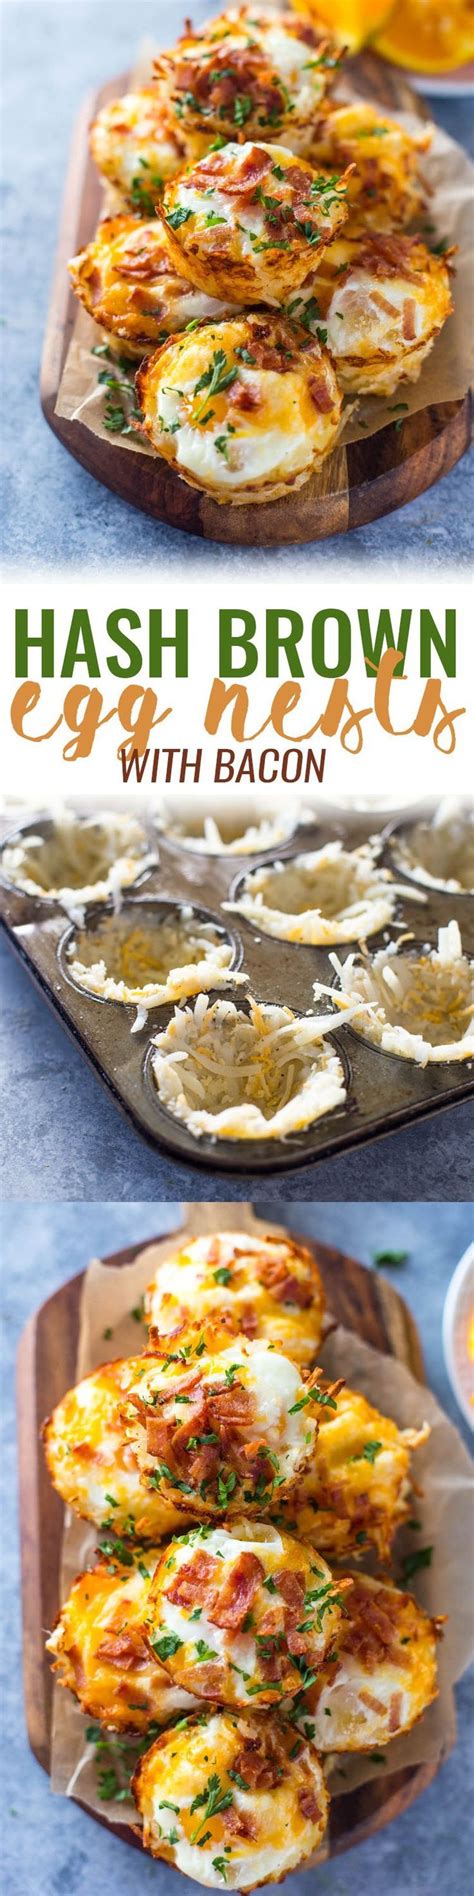 Scatter hash brown egg cups with chives, parmesan and remaining ham. Hash Brown Egg Nests | Advocare recipes, Cooking recipes ...